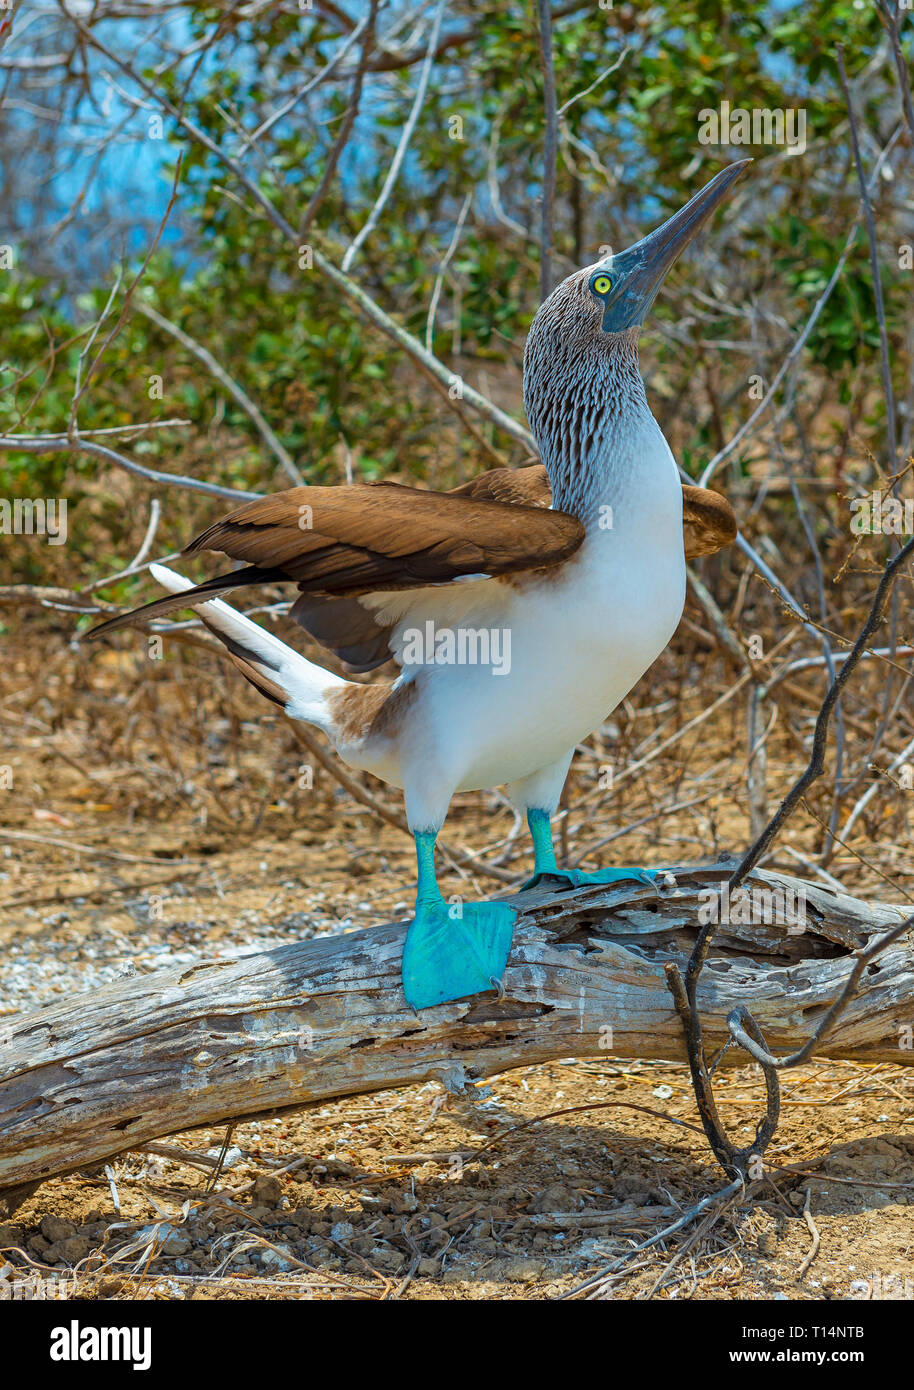 A Blue Footed Booby (Sula Nebouxii) on Espanola Island in the Galapagos Islands National Park, Pacific Ocean, Ecuador. Stock Photo